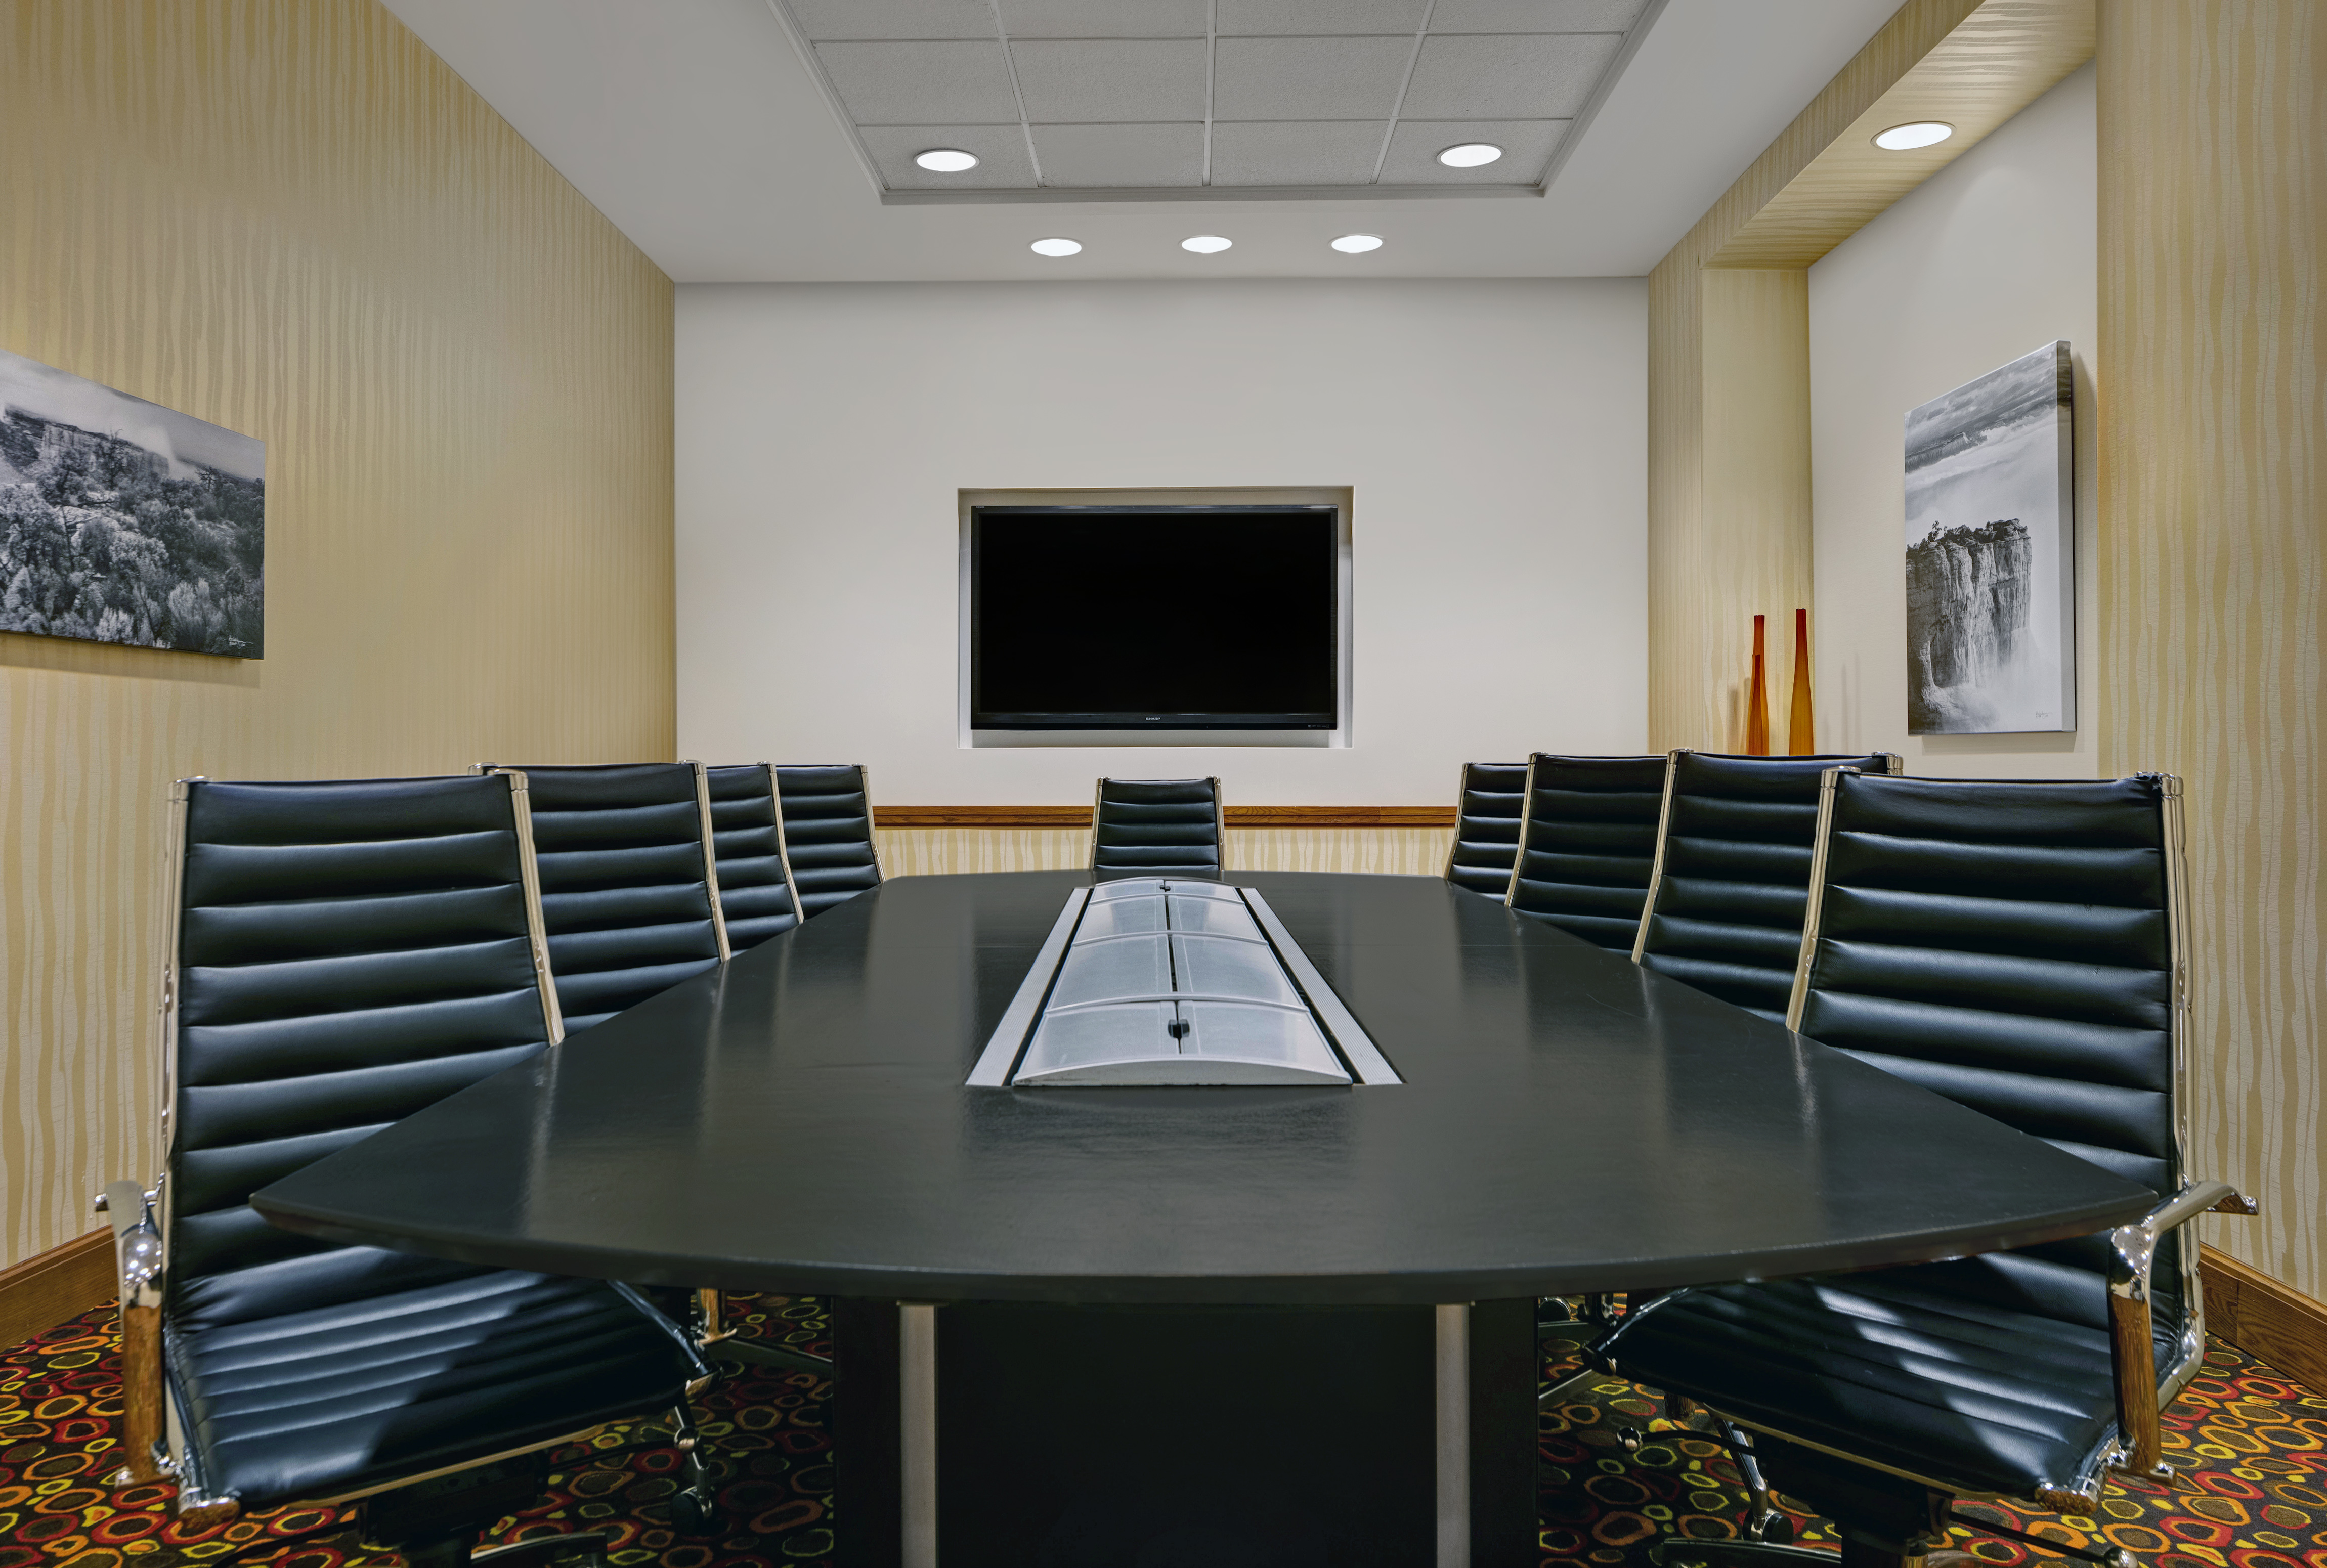 Boardroom with Seating for 10 Guests and an HDTV